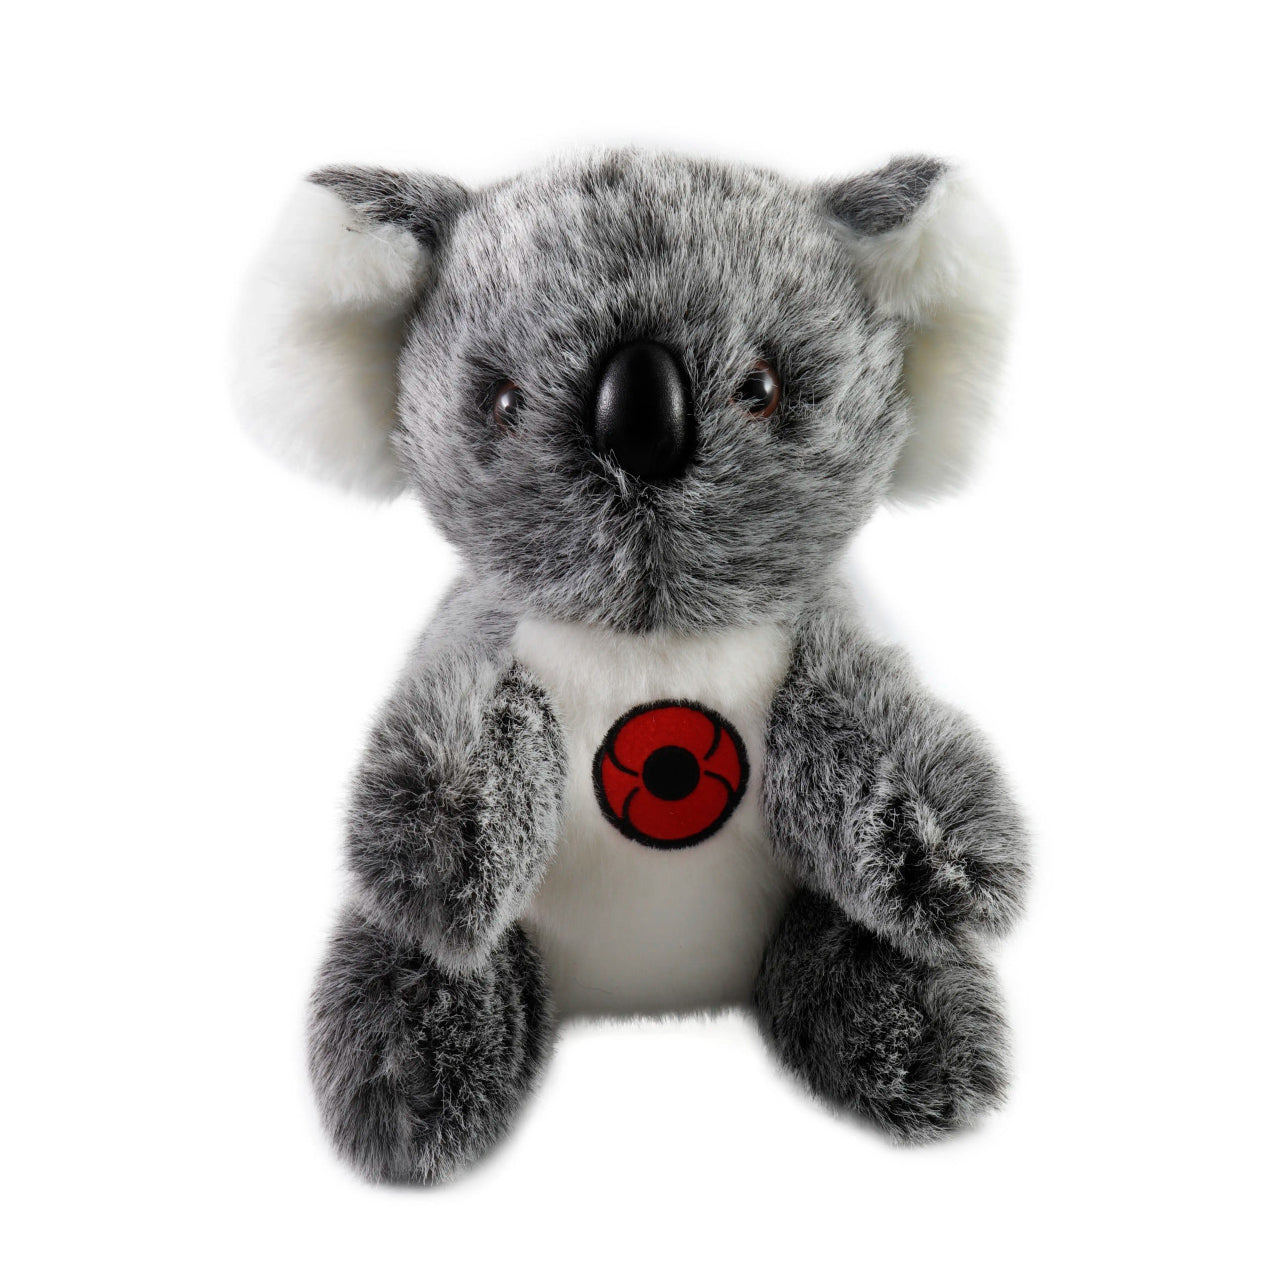 Bring home the delightful Poppy the Koala Bear and experience the joy of having an adorable and unique plush companion. Its distinctive design, superior material, and convenient size make it the perfect cuddling companion or a charming decorative piece. Don't miss out on this plushie. www.defenceqstore.com.au